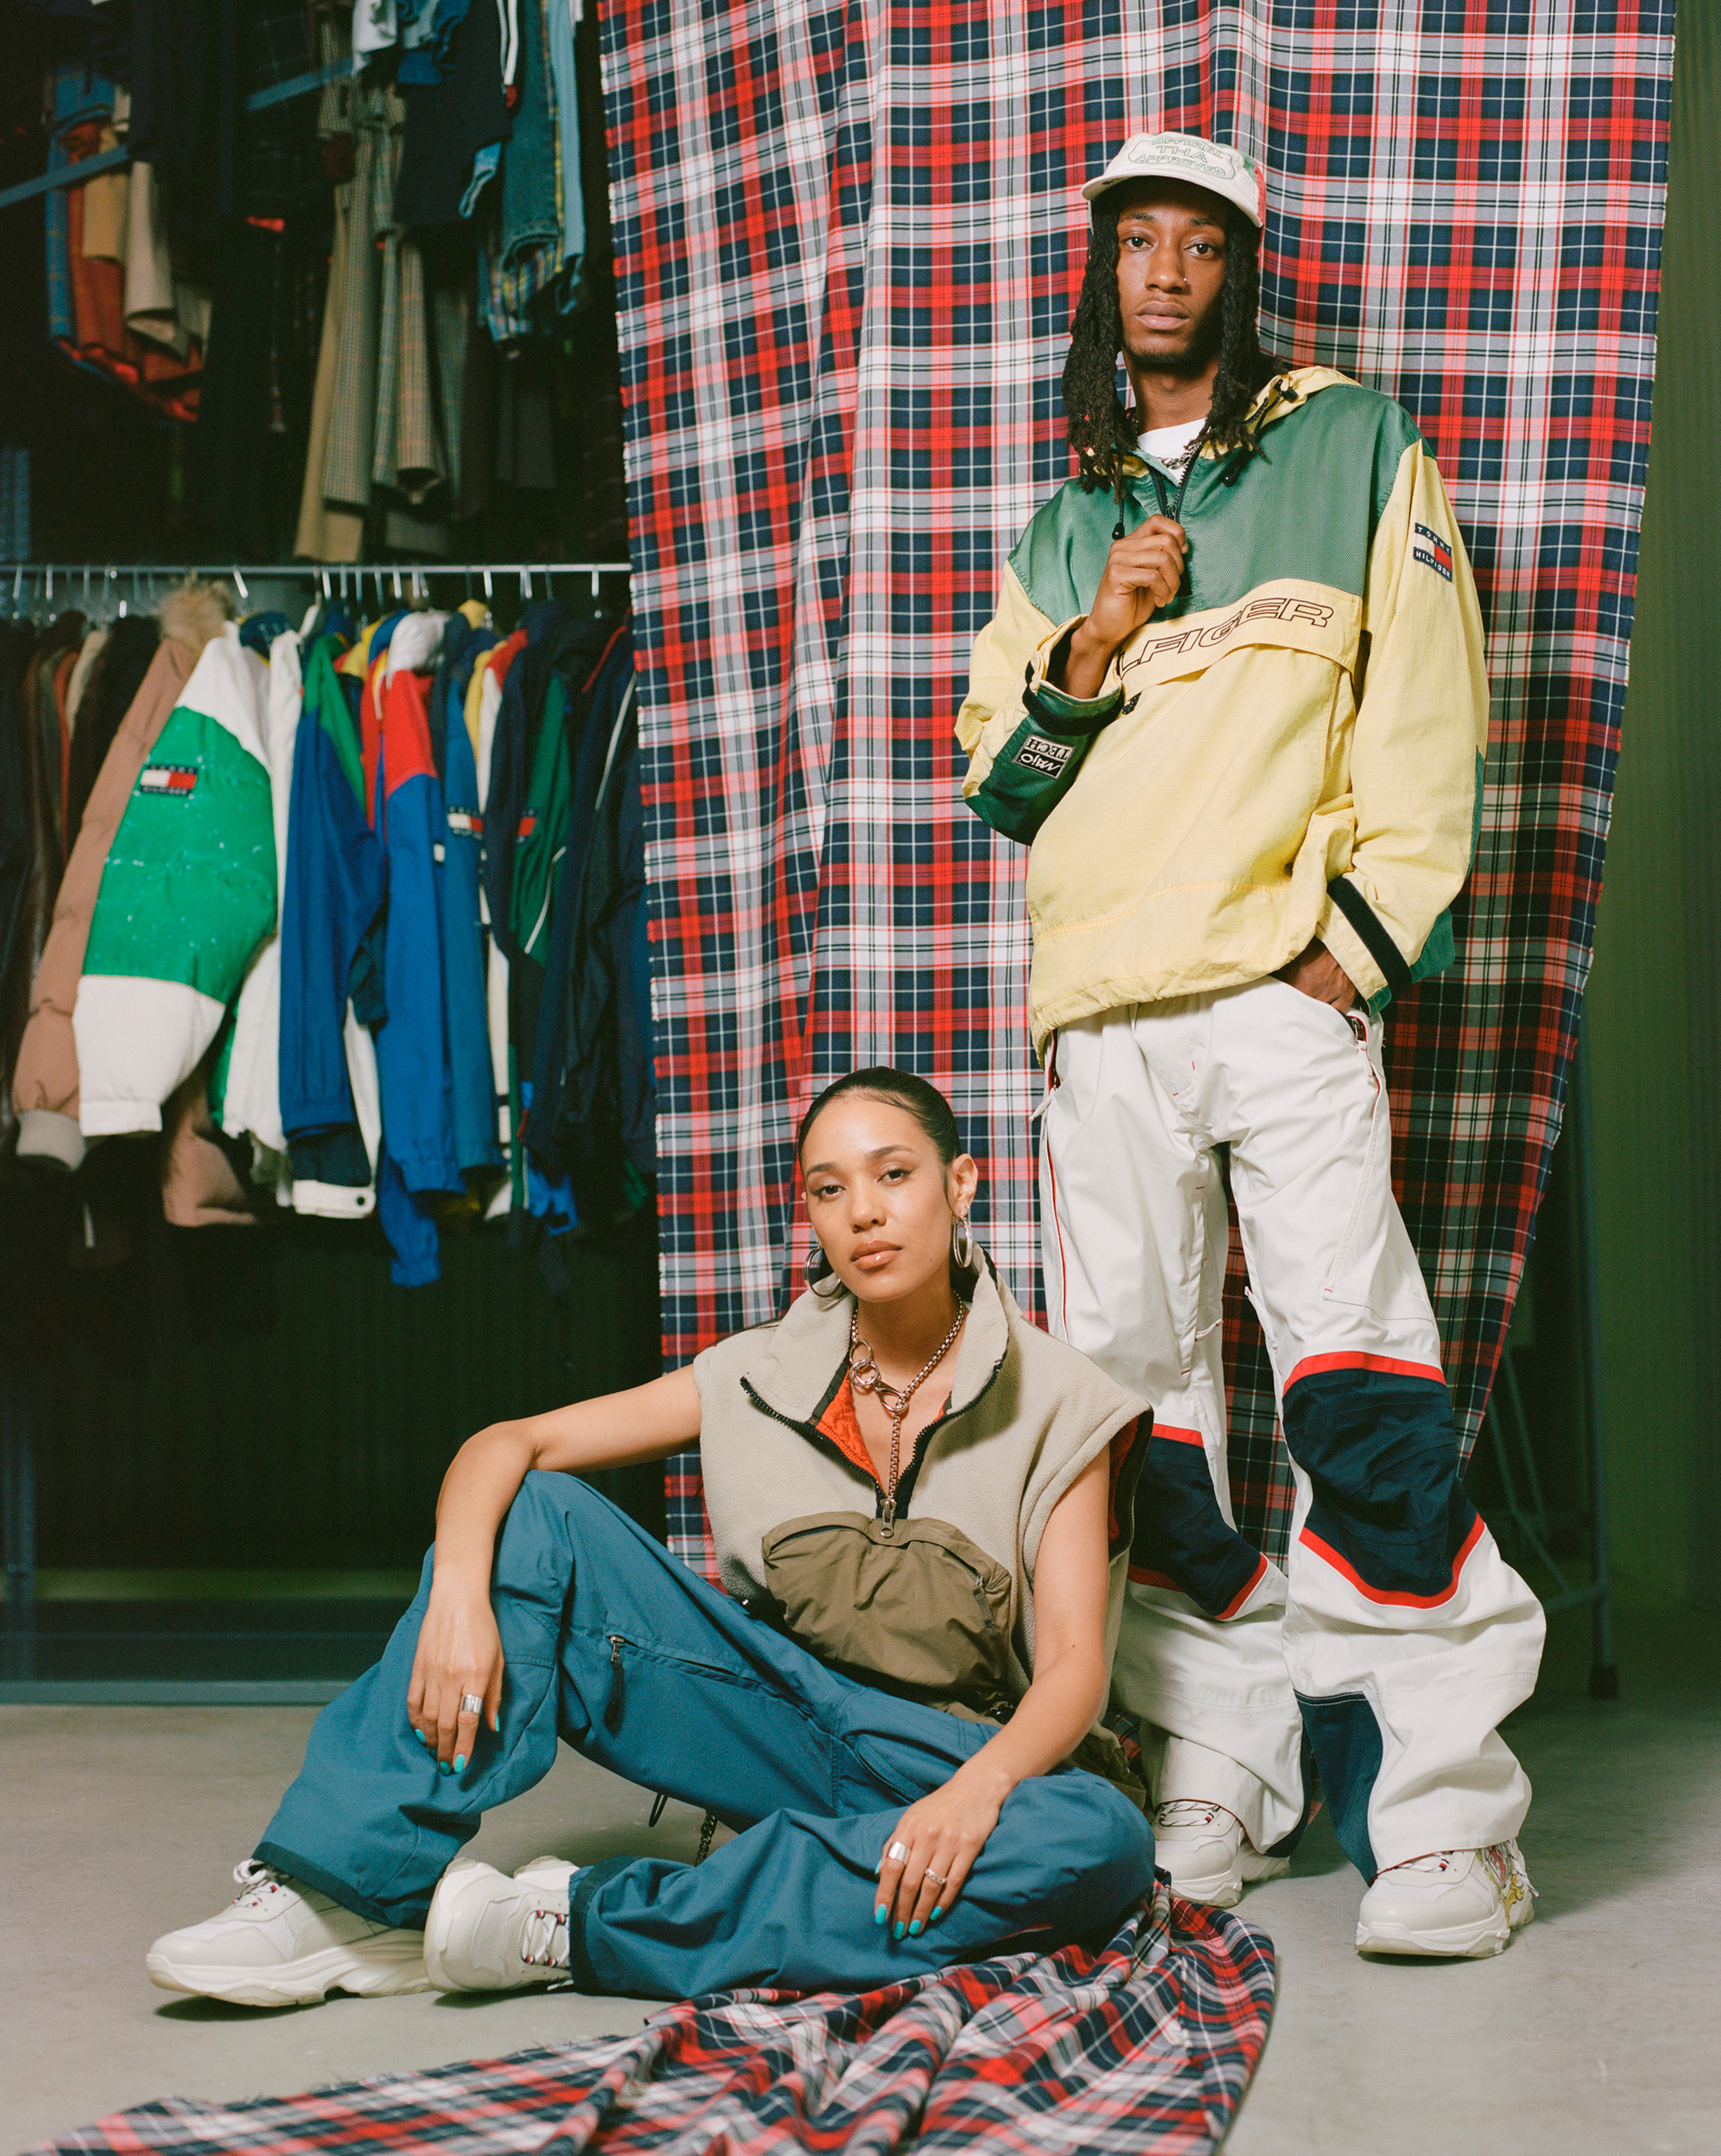 Tommy Hilfiger to Sell Vintage Pieces From the '90s and Early '00s